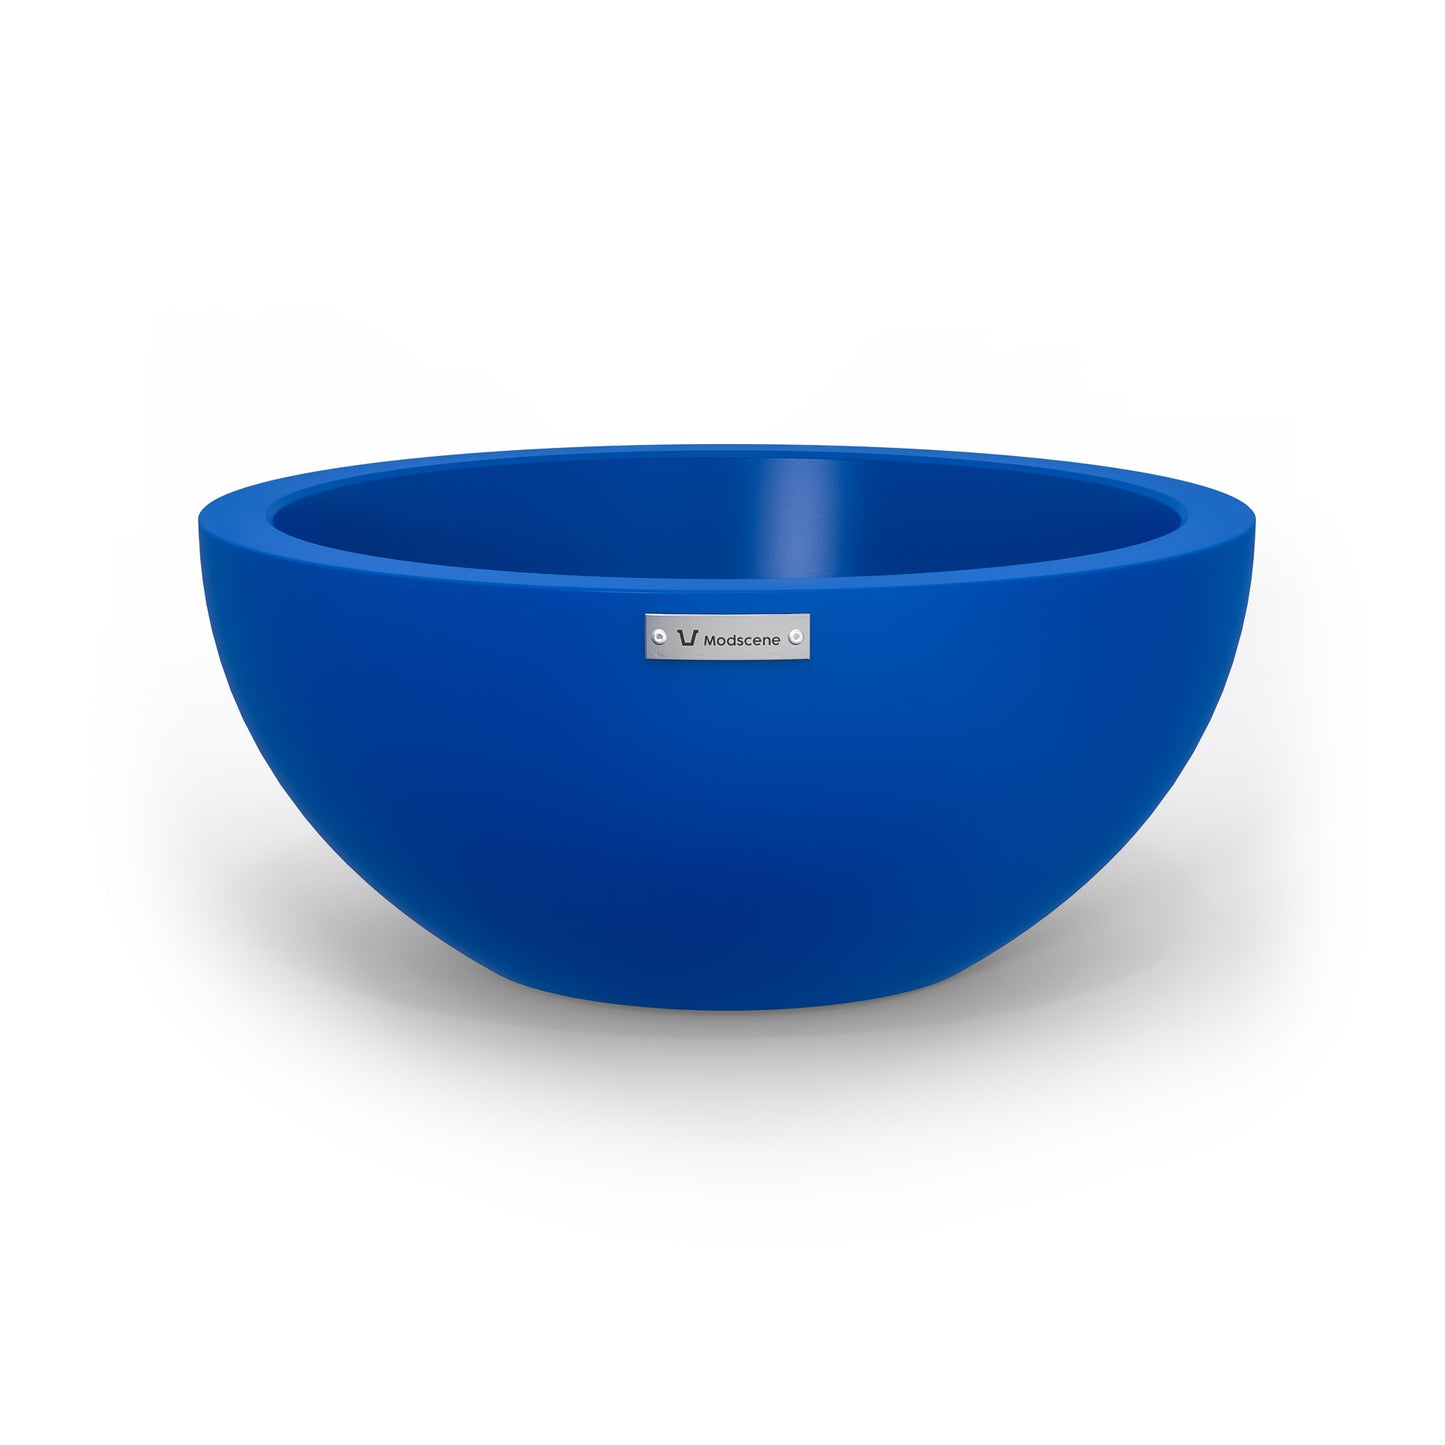 A small planter bowl in a deep blue colour made by Modscene.